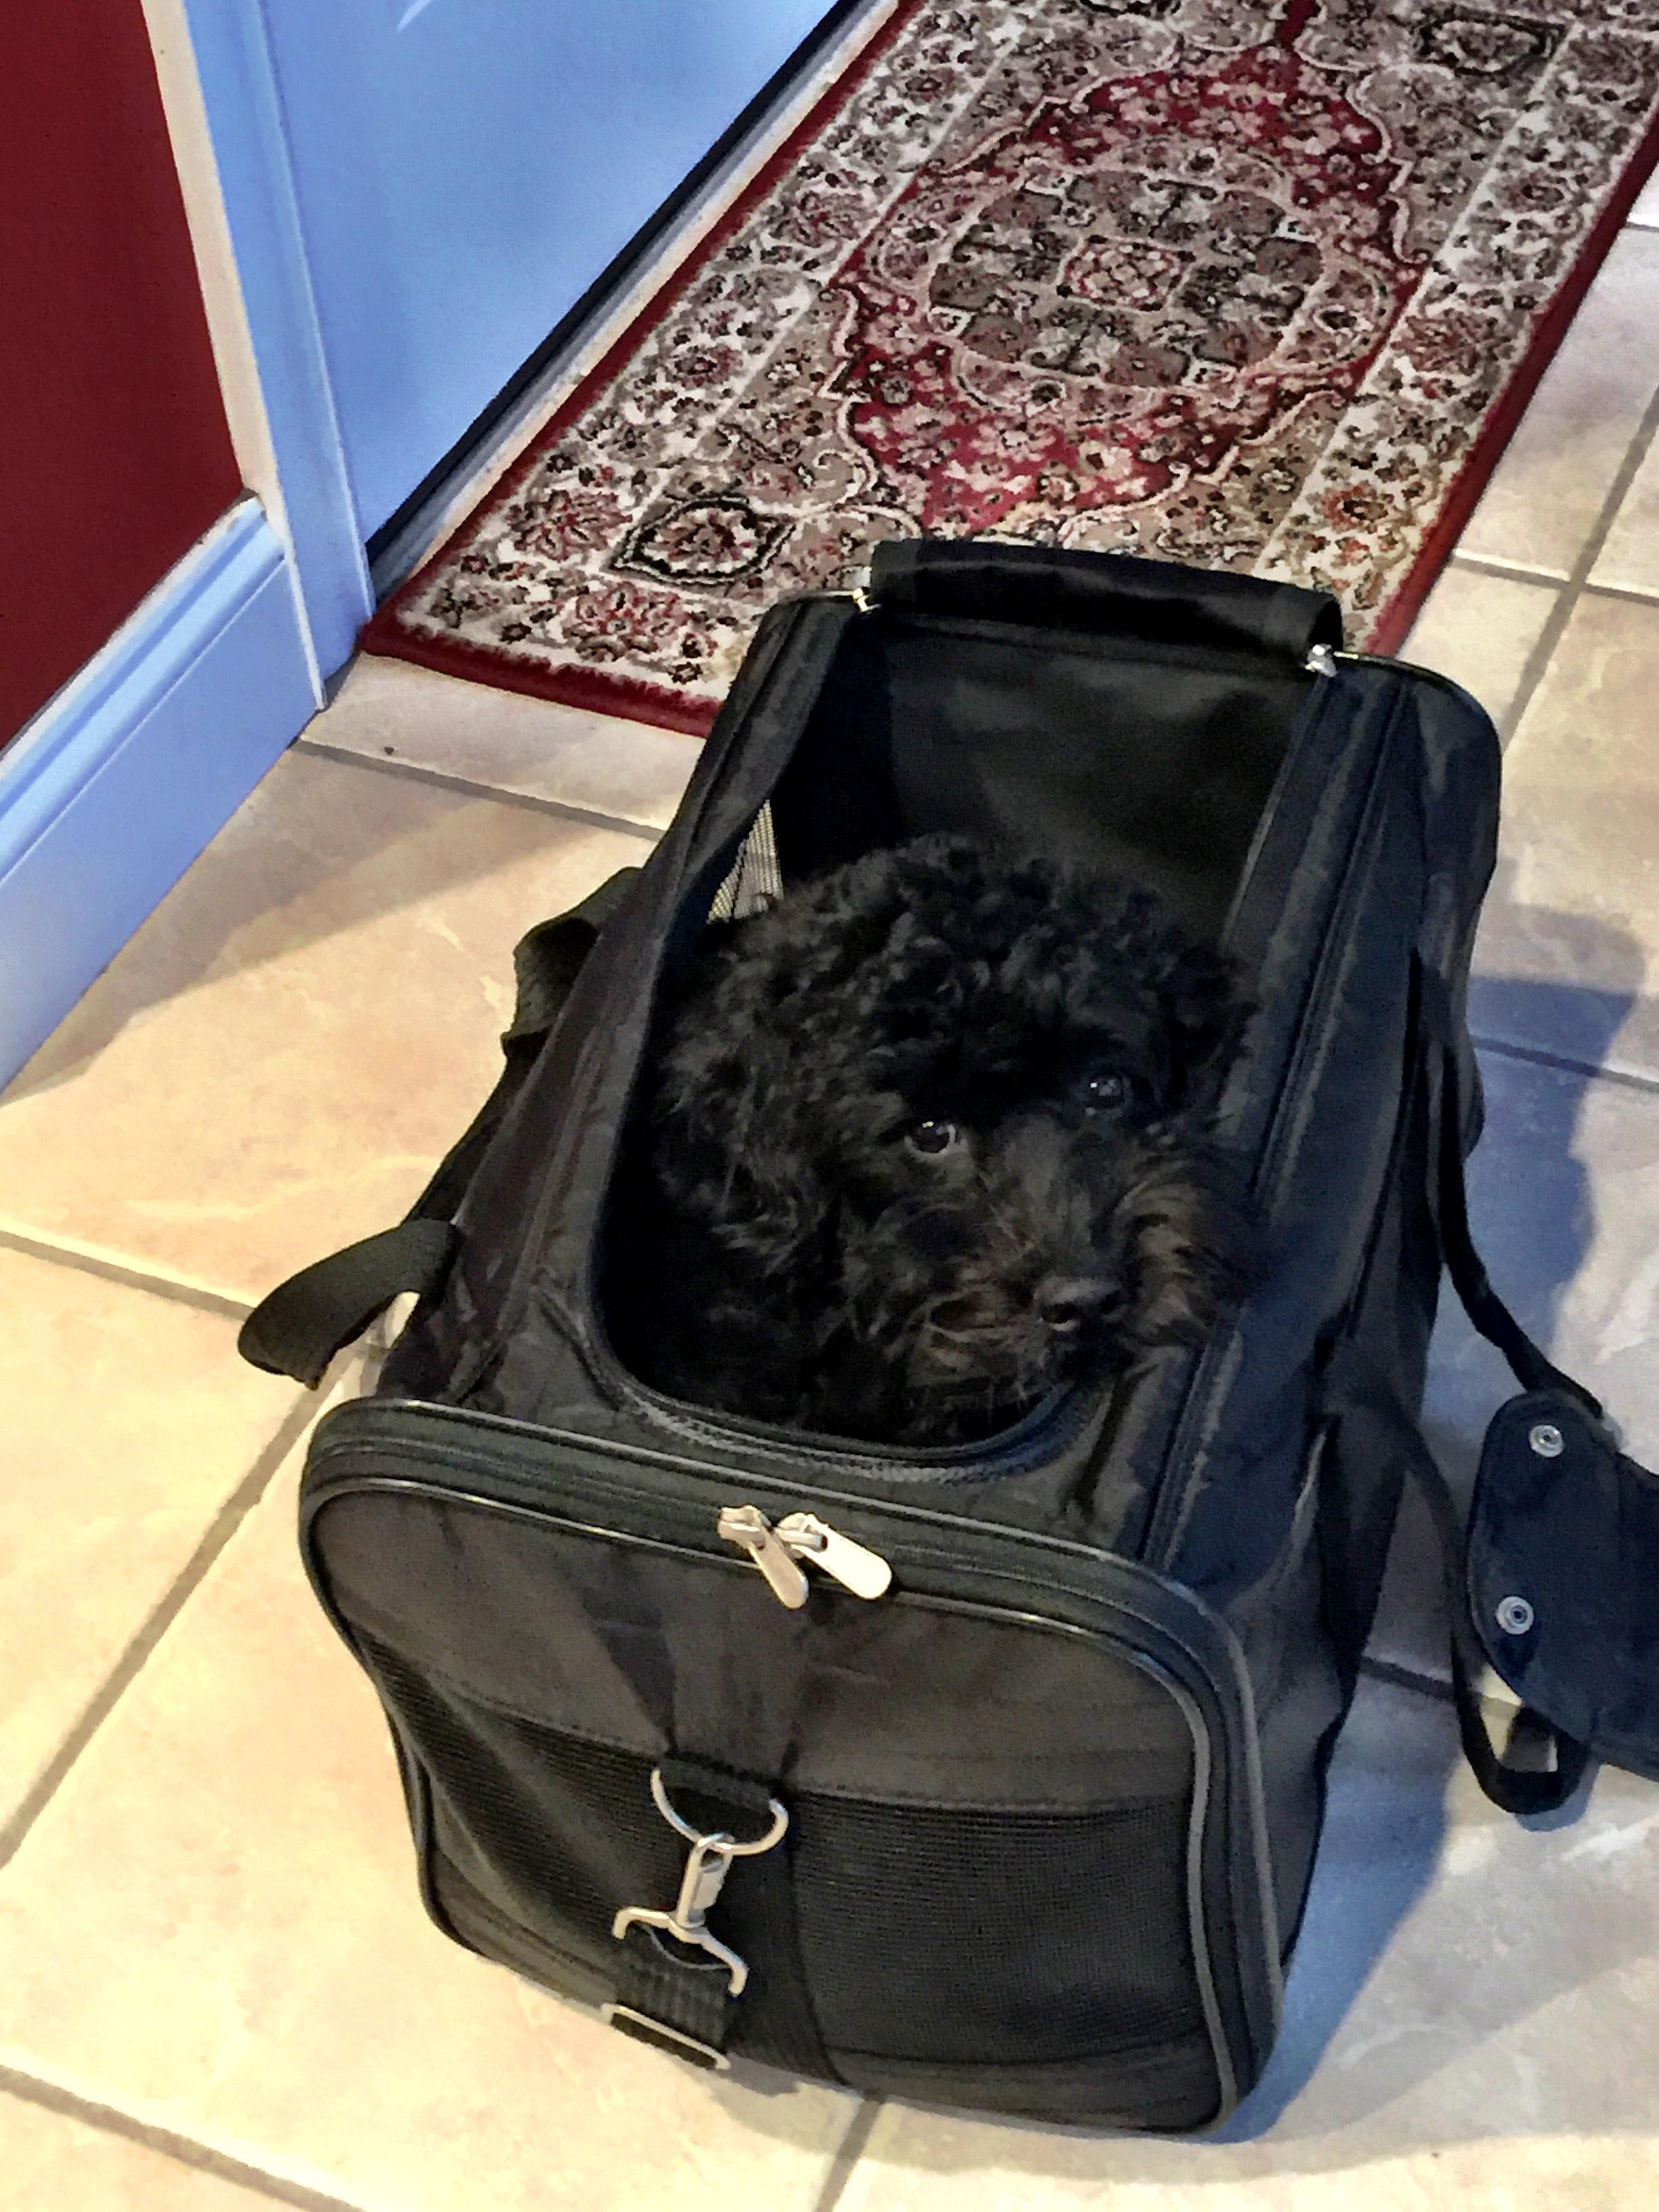 Dog in sherpa carrier for traveling